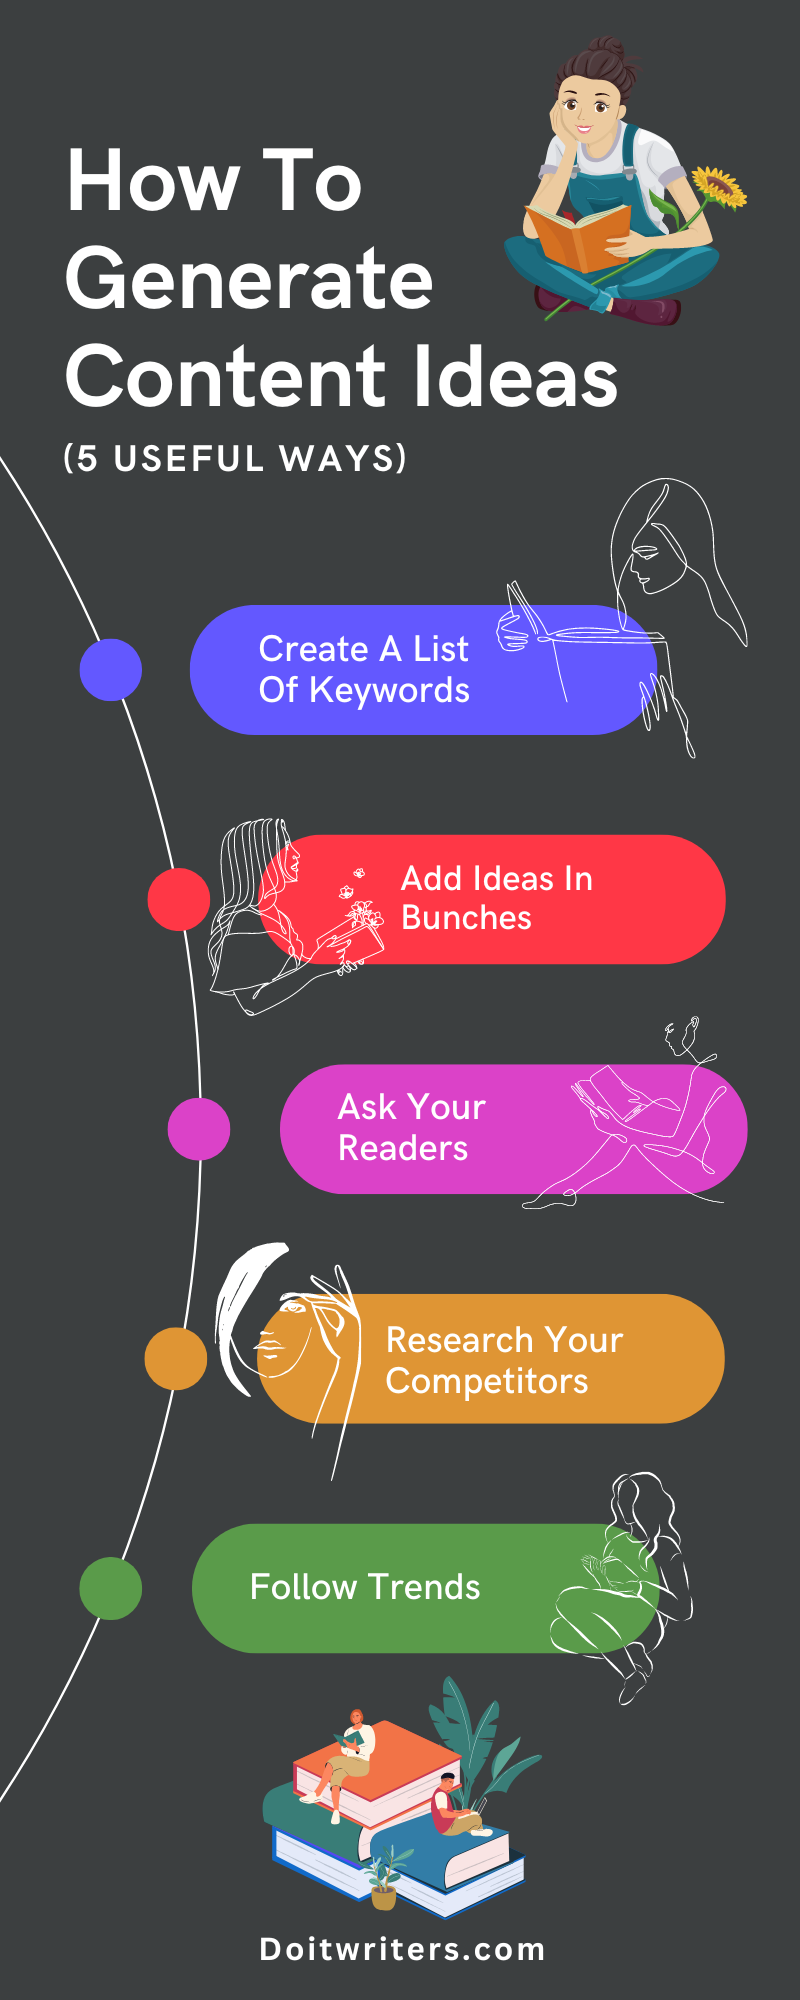 How To Generate Content Ideas (5 Useful Ways)